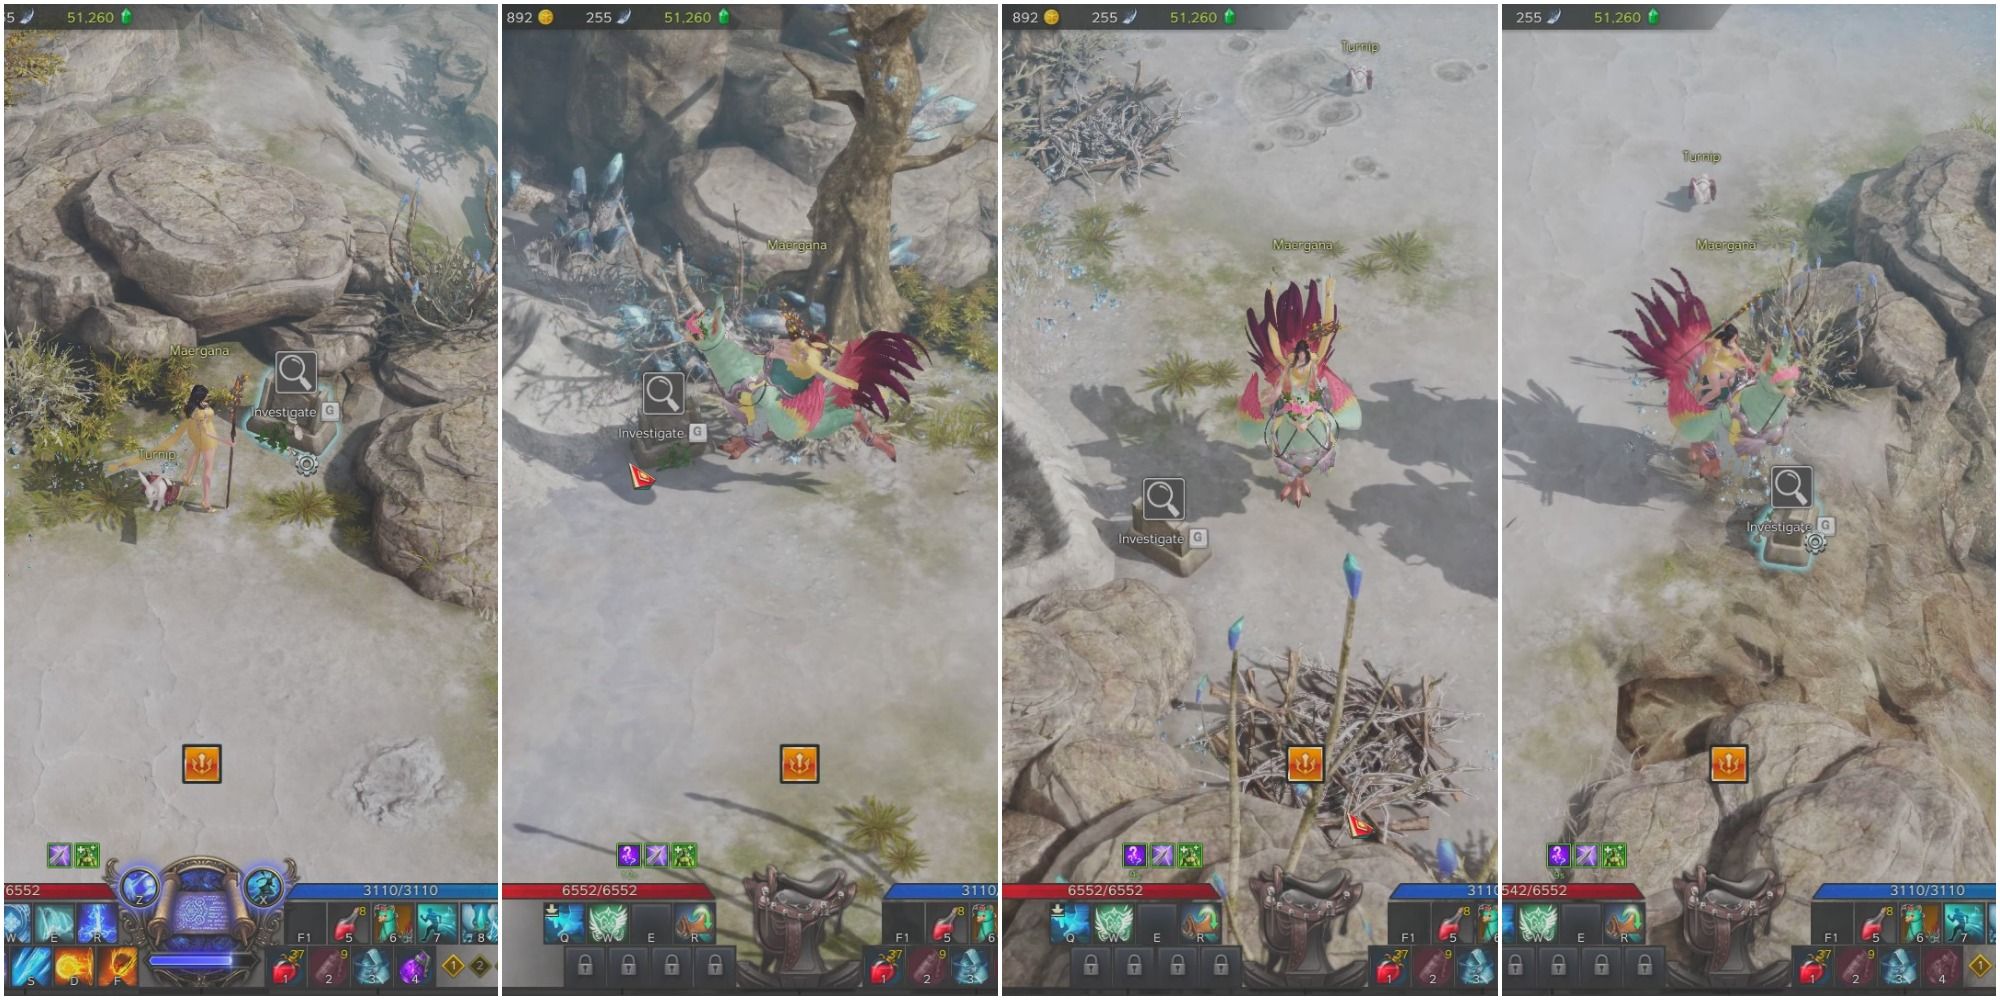 Split image of player standing before grave by stone outcrop, player before grave in front of dead tree, player before grave in desert area, and player before grave near edge of cliff